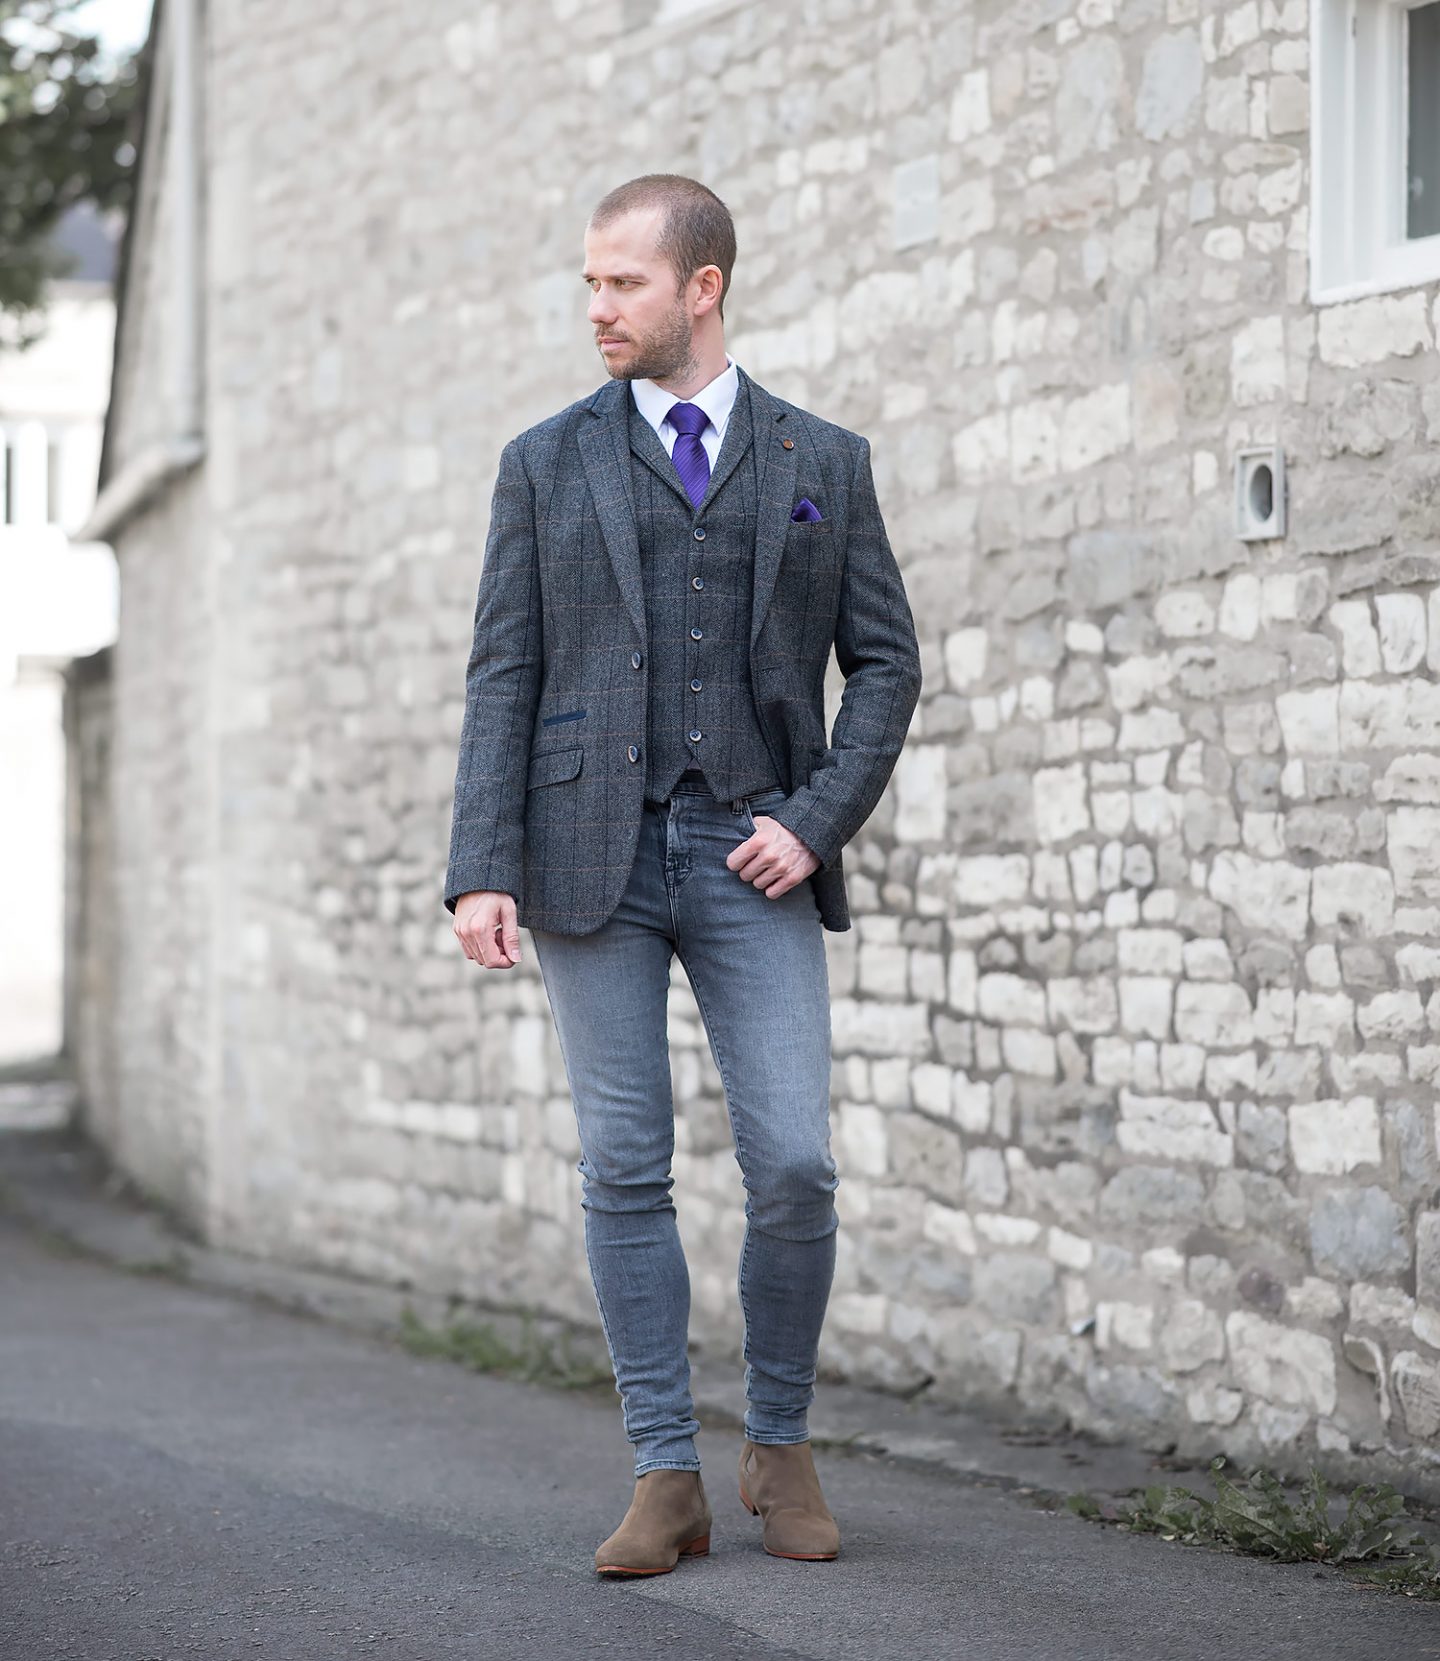 Tweed Suit With J Brand Skinny Jeans Outfit - Your Average Guy